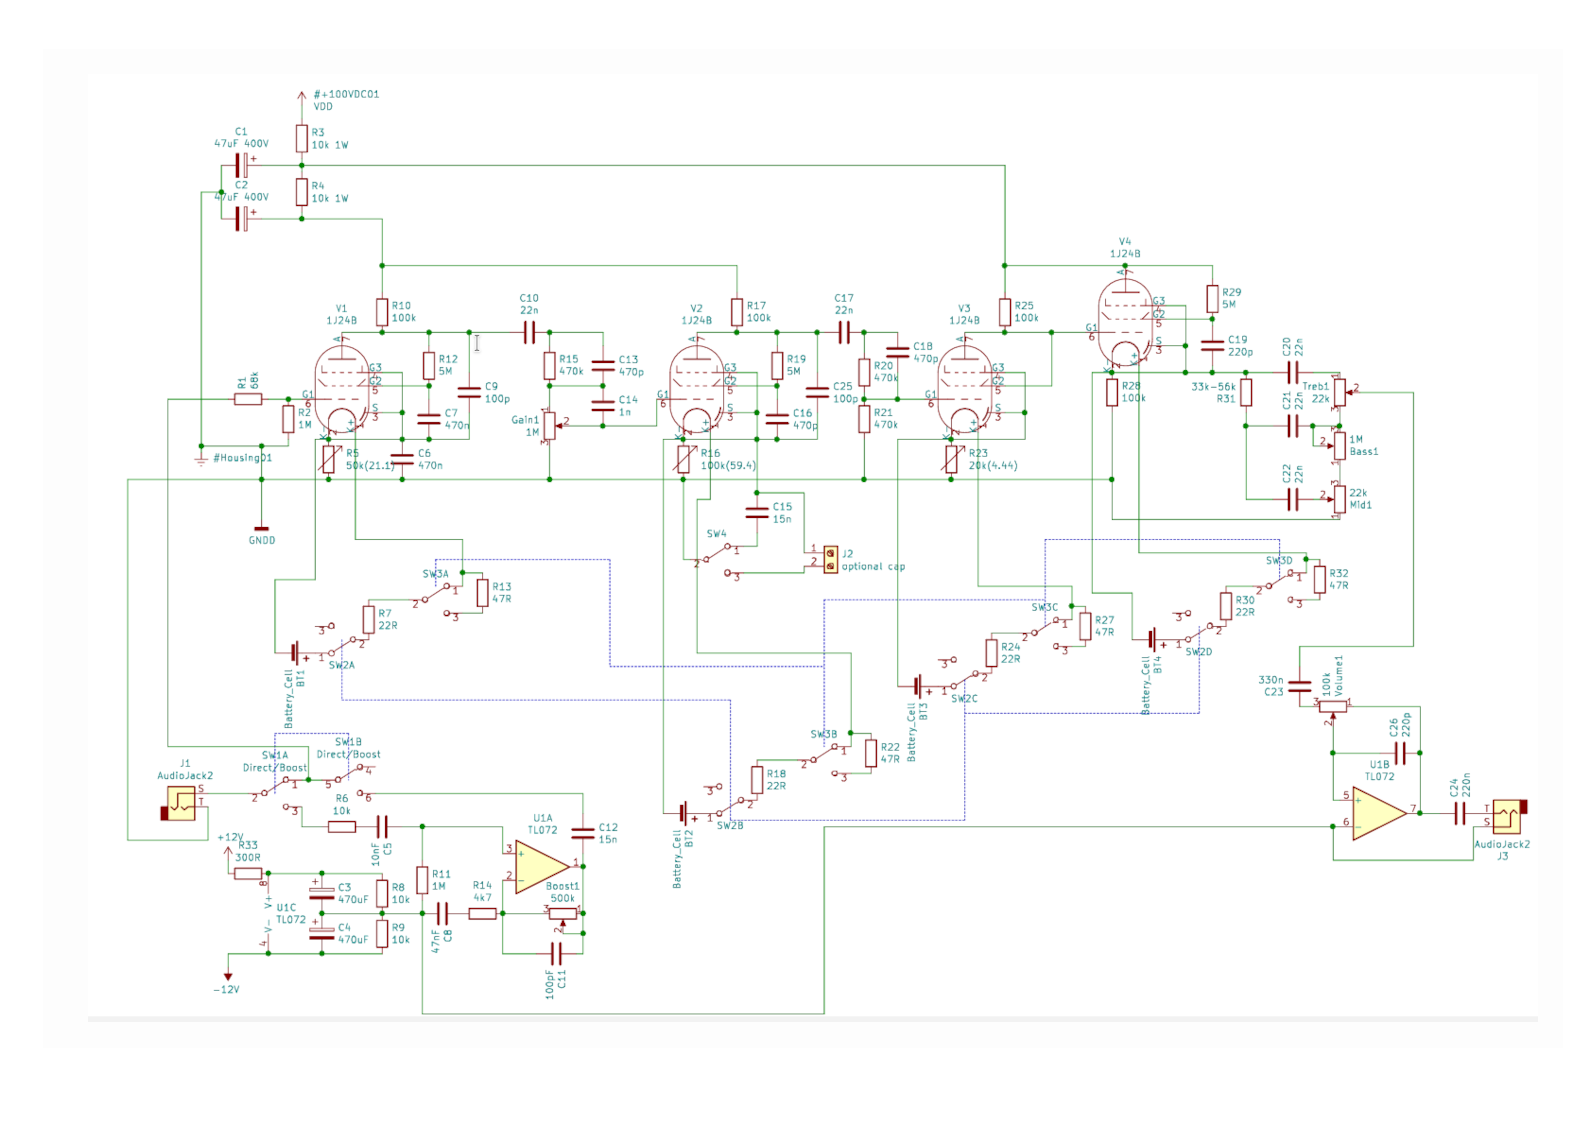 marshlands800Schematic_Highlighted_nakedSchematic_noV3cap.png